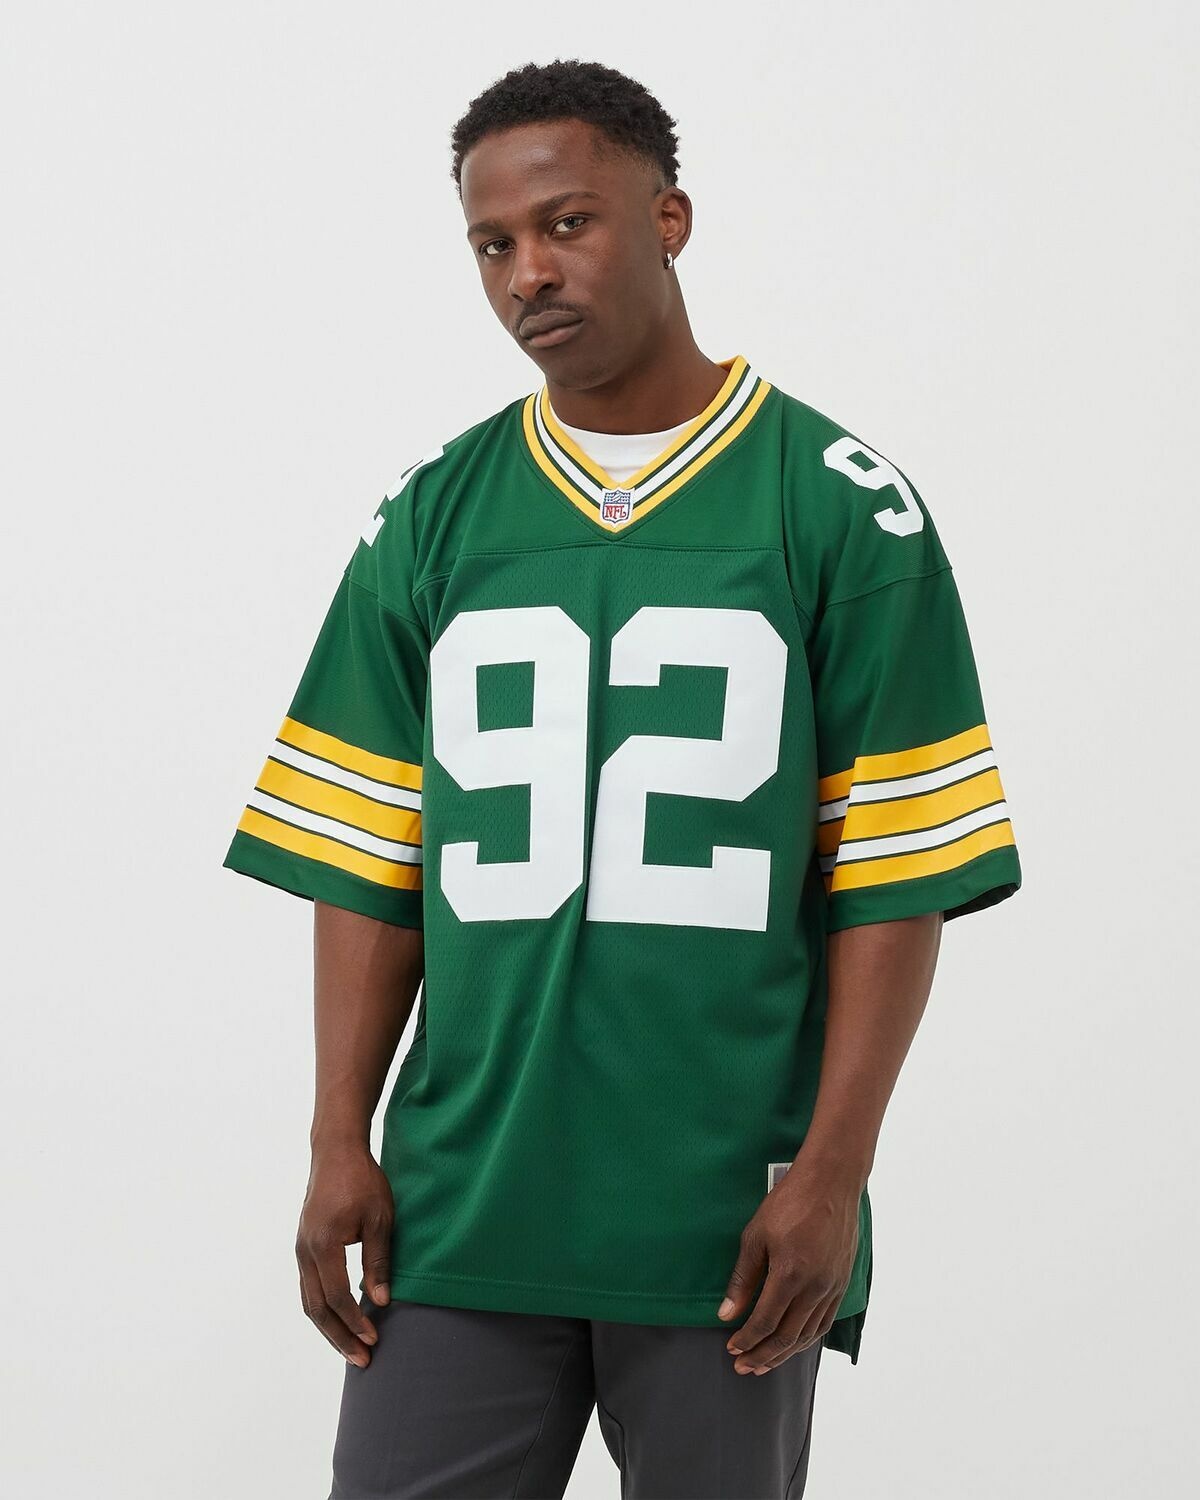 Mitchell & Ness Nfl Legacy Jersey Green Bay Packers 1996 Reggie White #92 Green - Mens - Jerseys